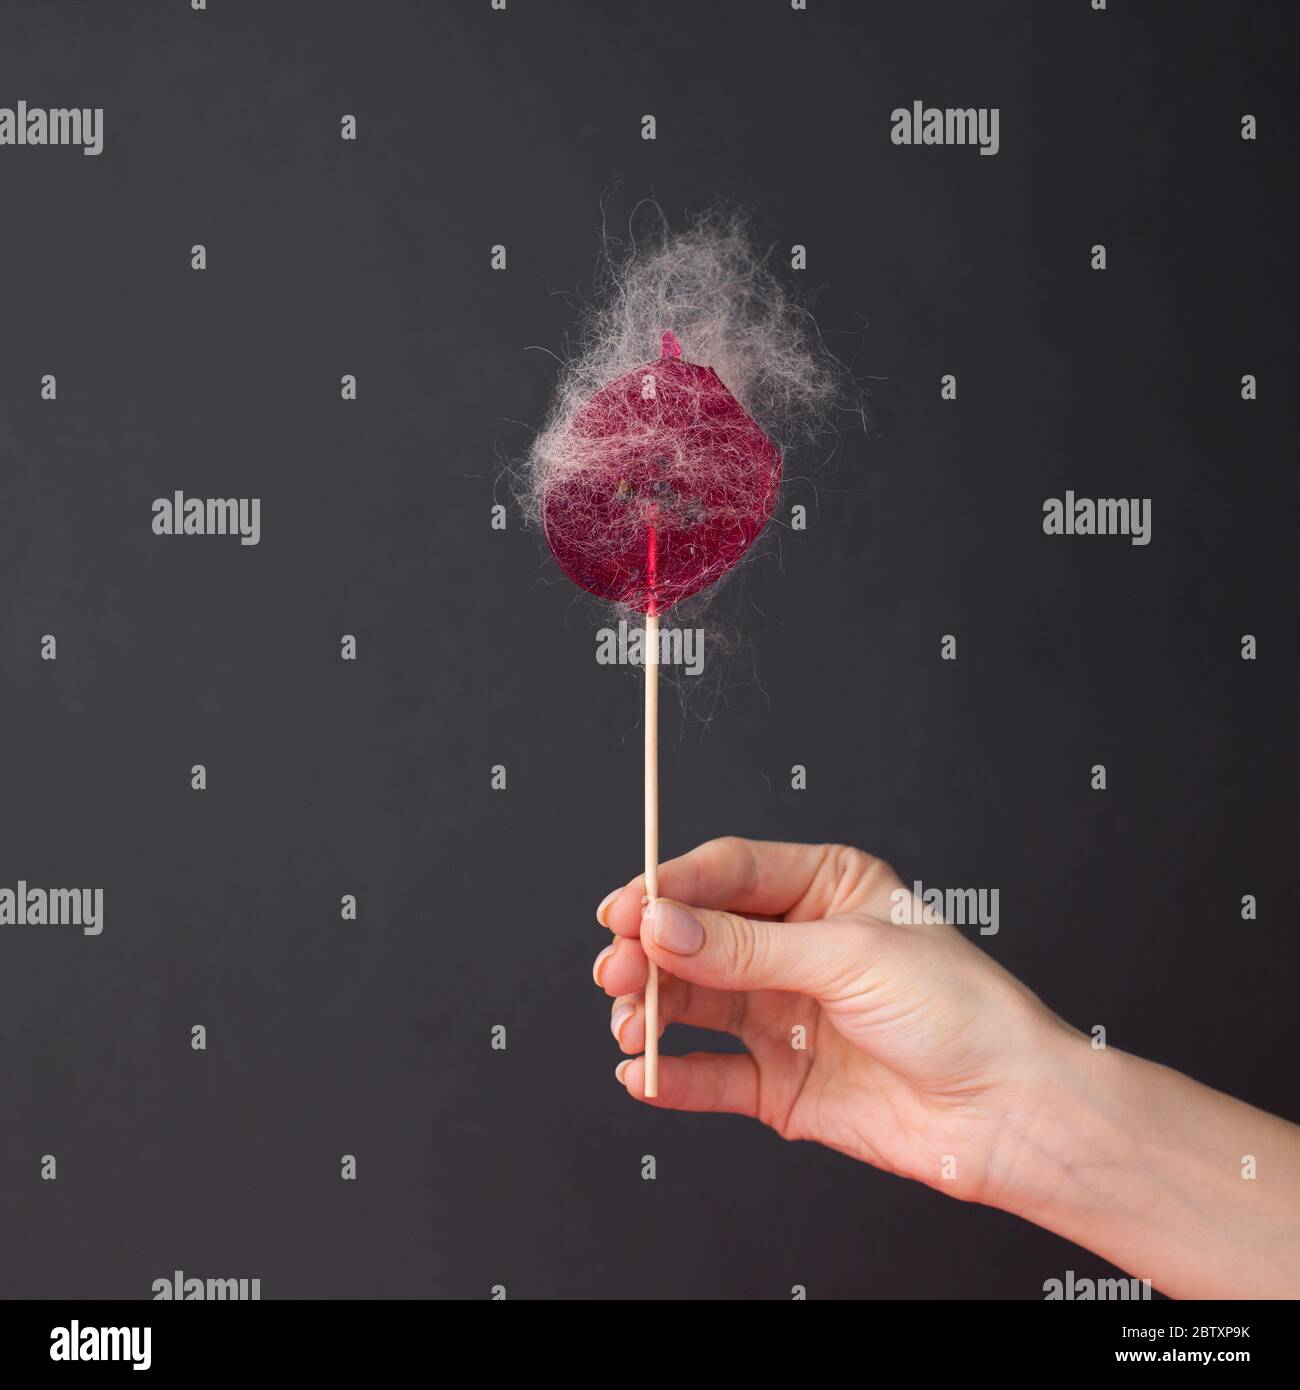 Pink lollipop with sticky hair in a female hand on black background ...